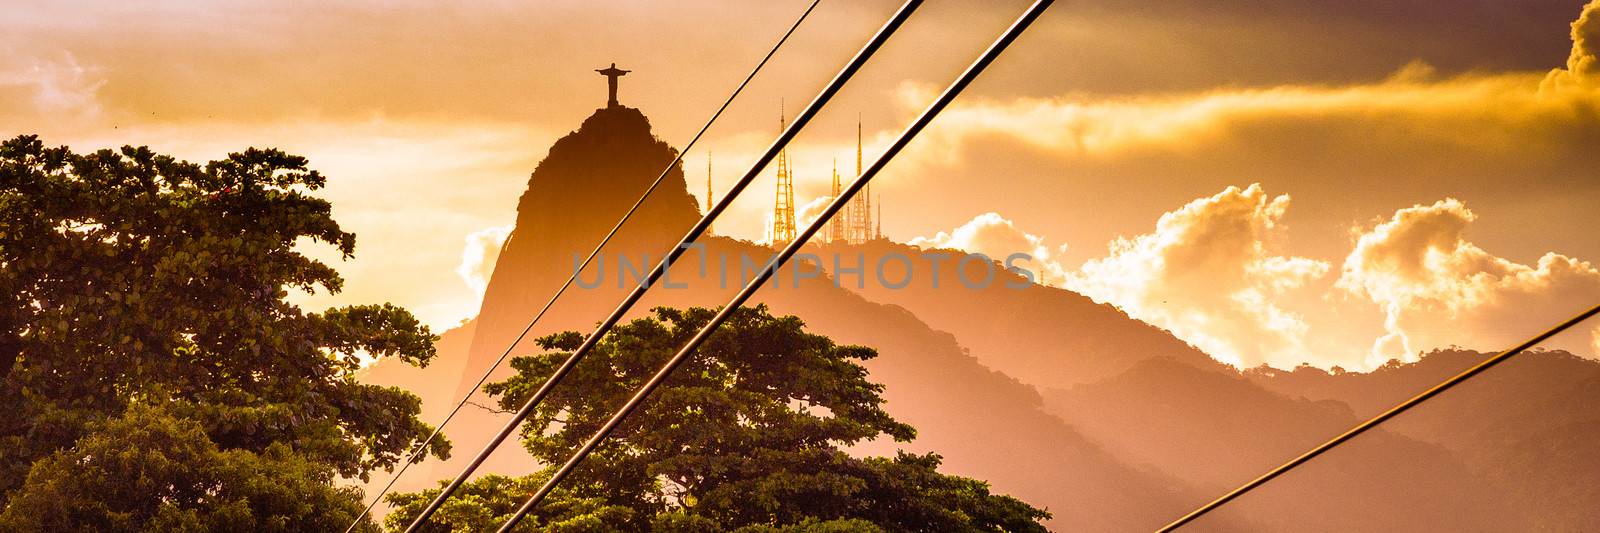 Metal cables with the Christ The Redeemer statue in the background, Corcovado, Rio de Janeiro, Brazil